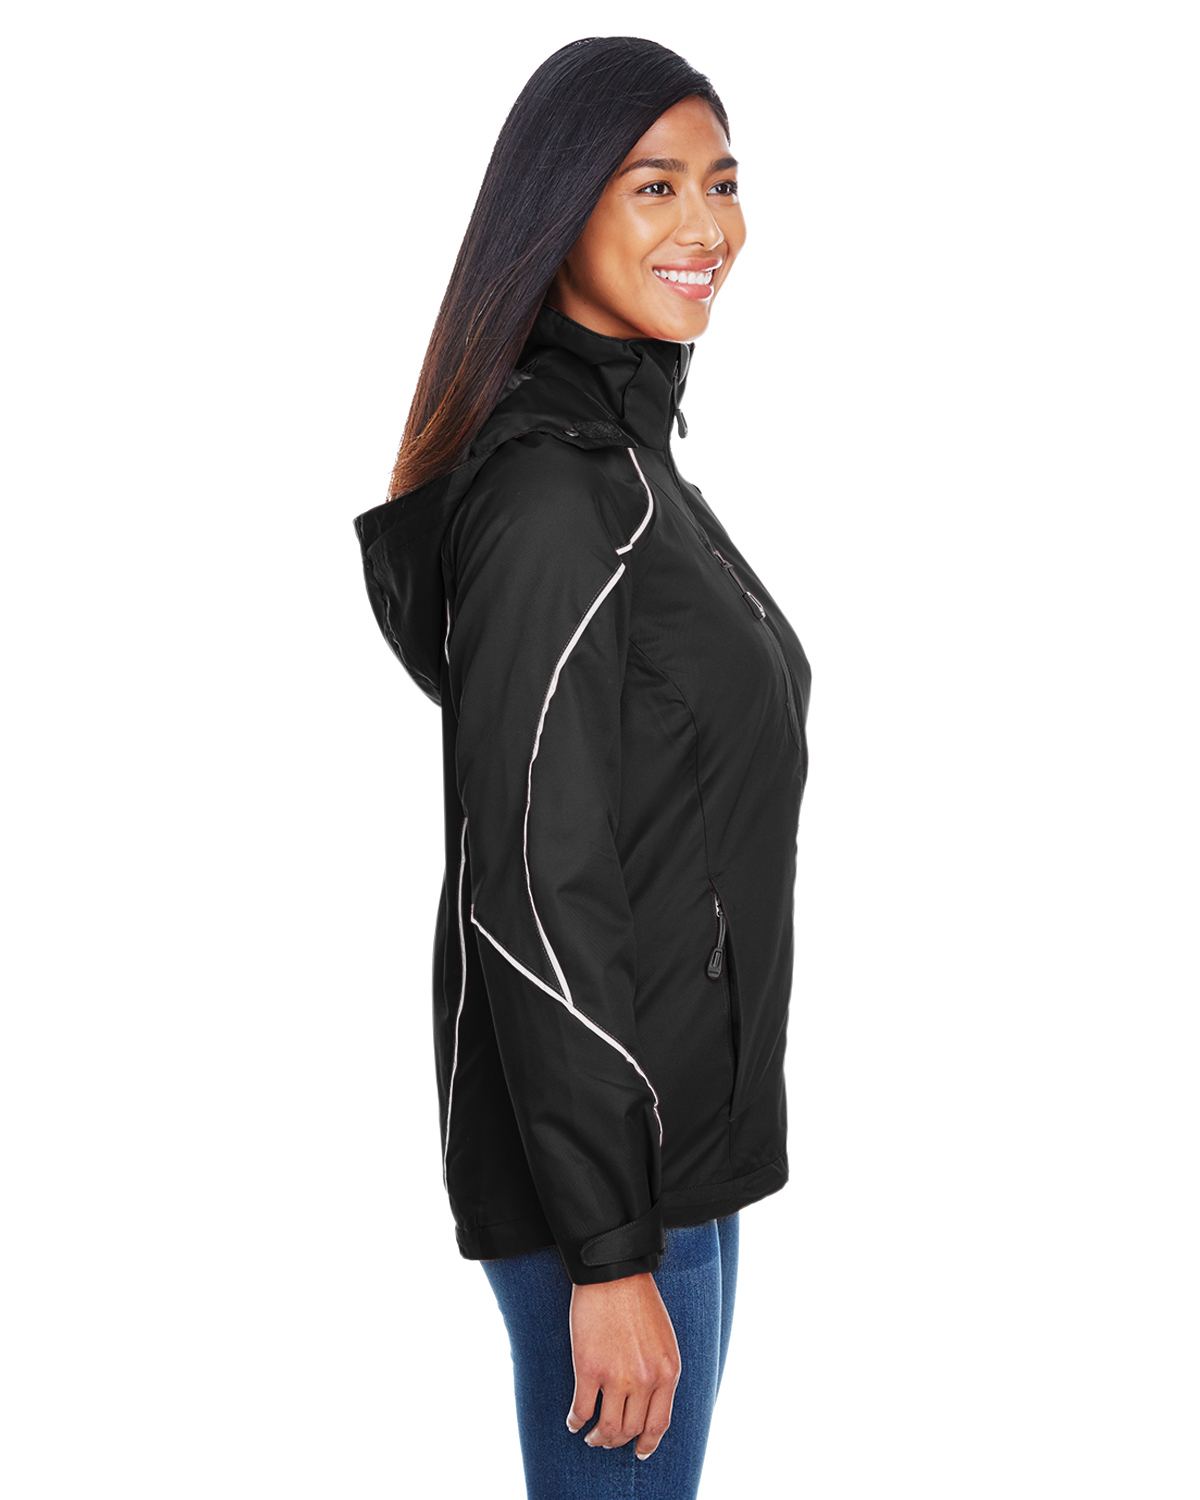 Ladies' Angle 3-in-1 Jacket with Bonded Fleece Liner - BLACK - L - image 3 of 3